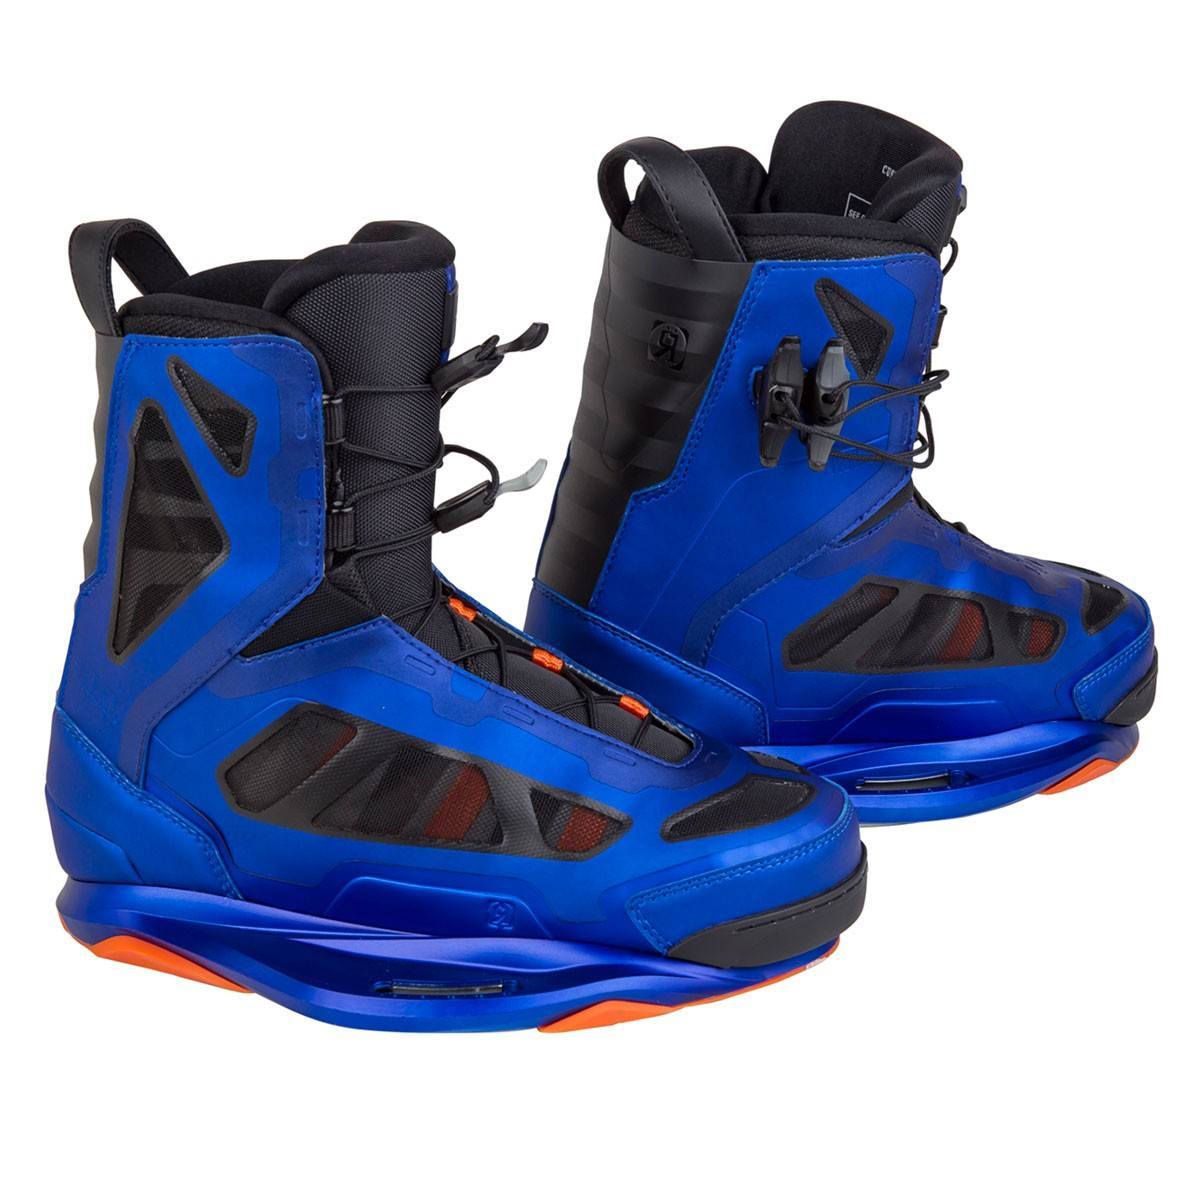 2015-ronix-boots-parks-anodizedocean-02